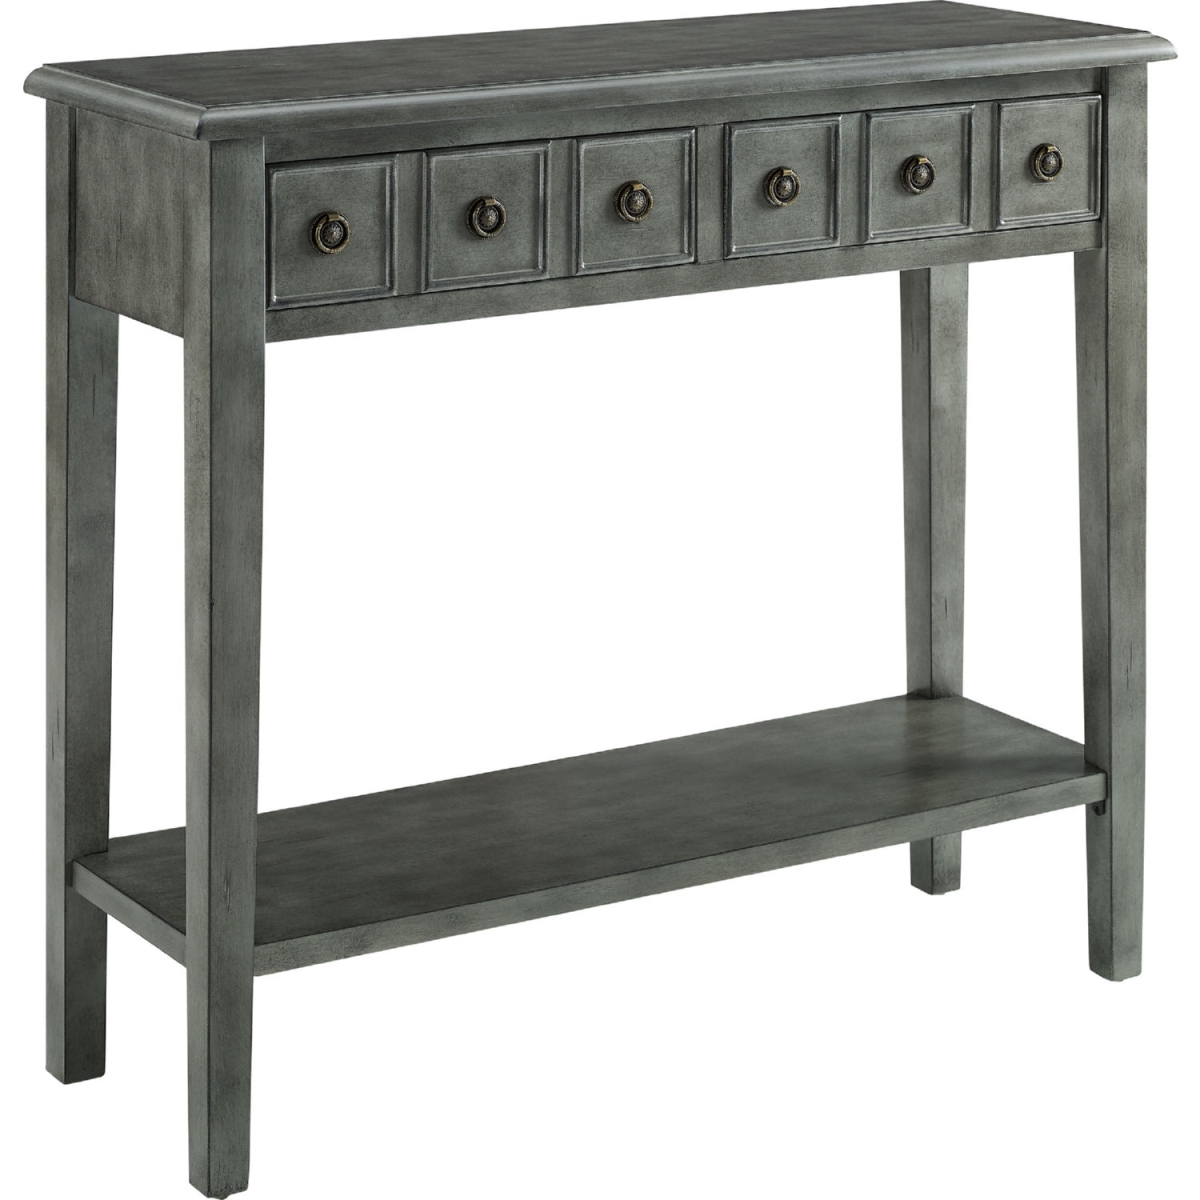 D1312a19g 38 In. Sadie Console Table, Grey